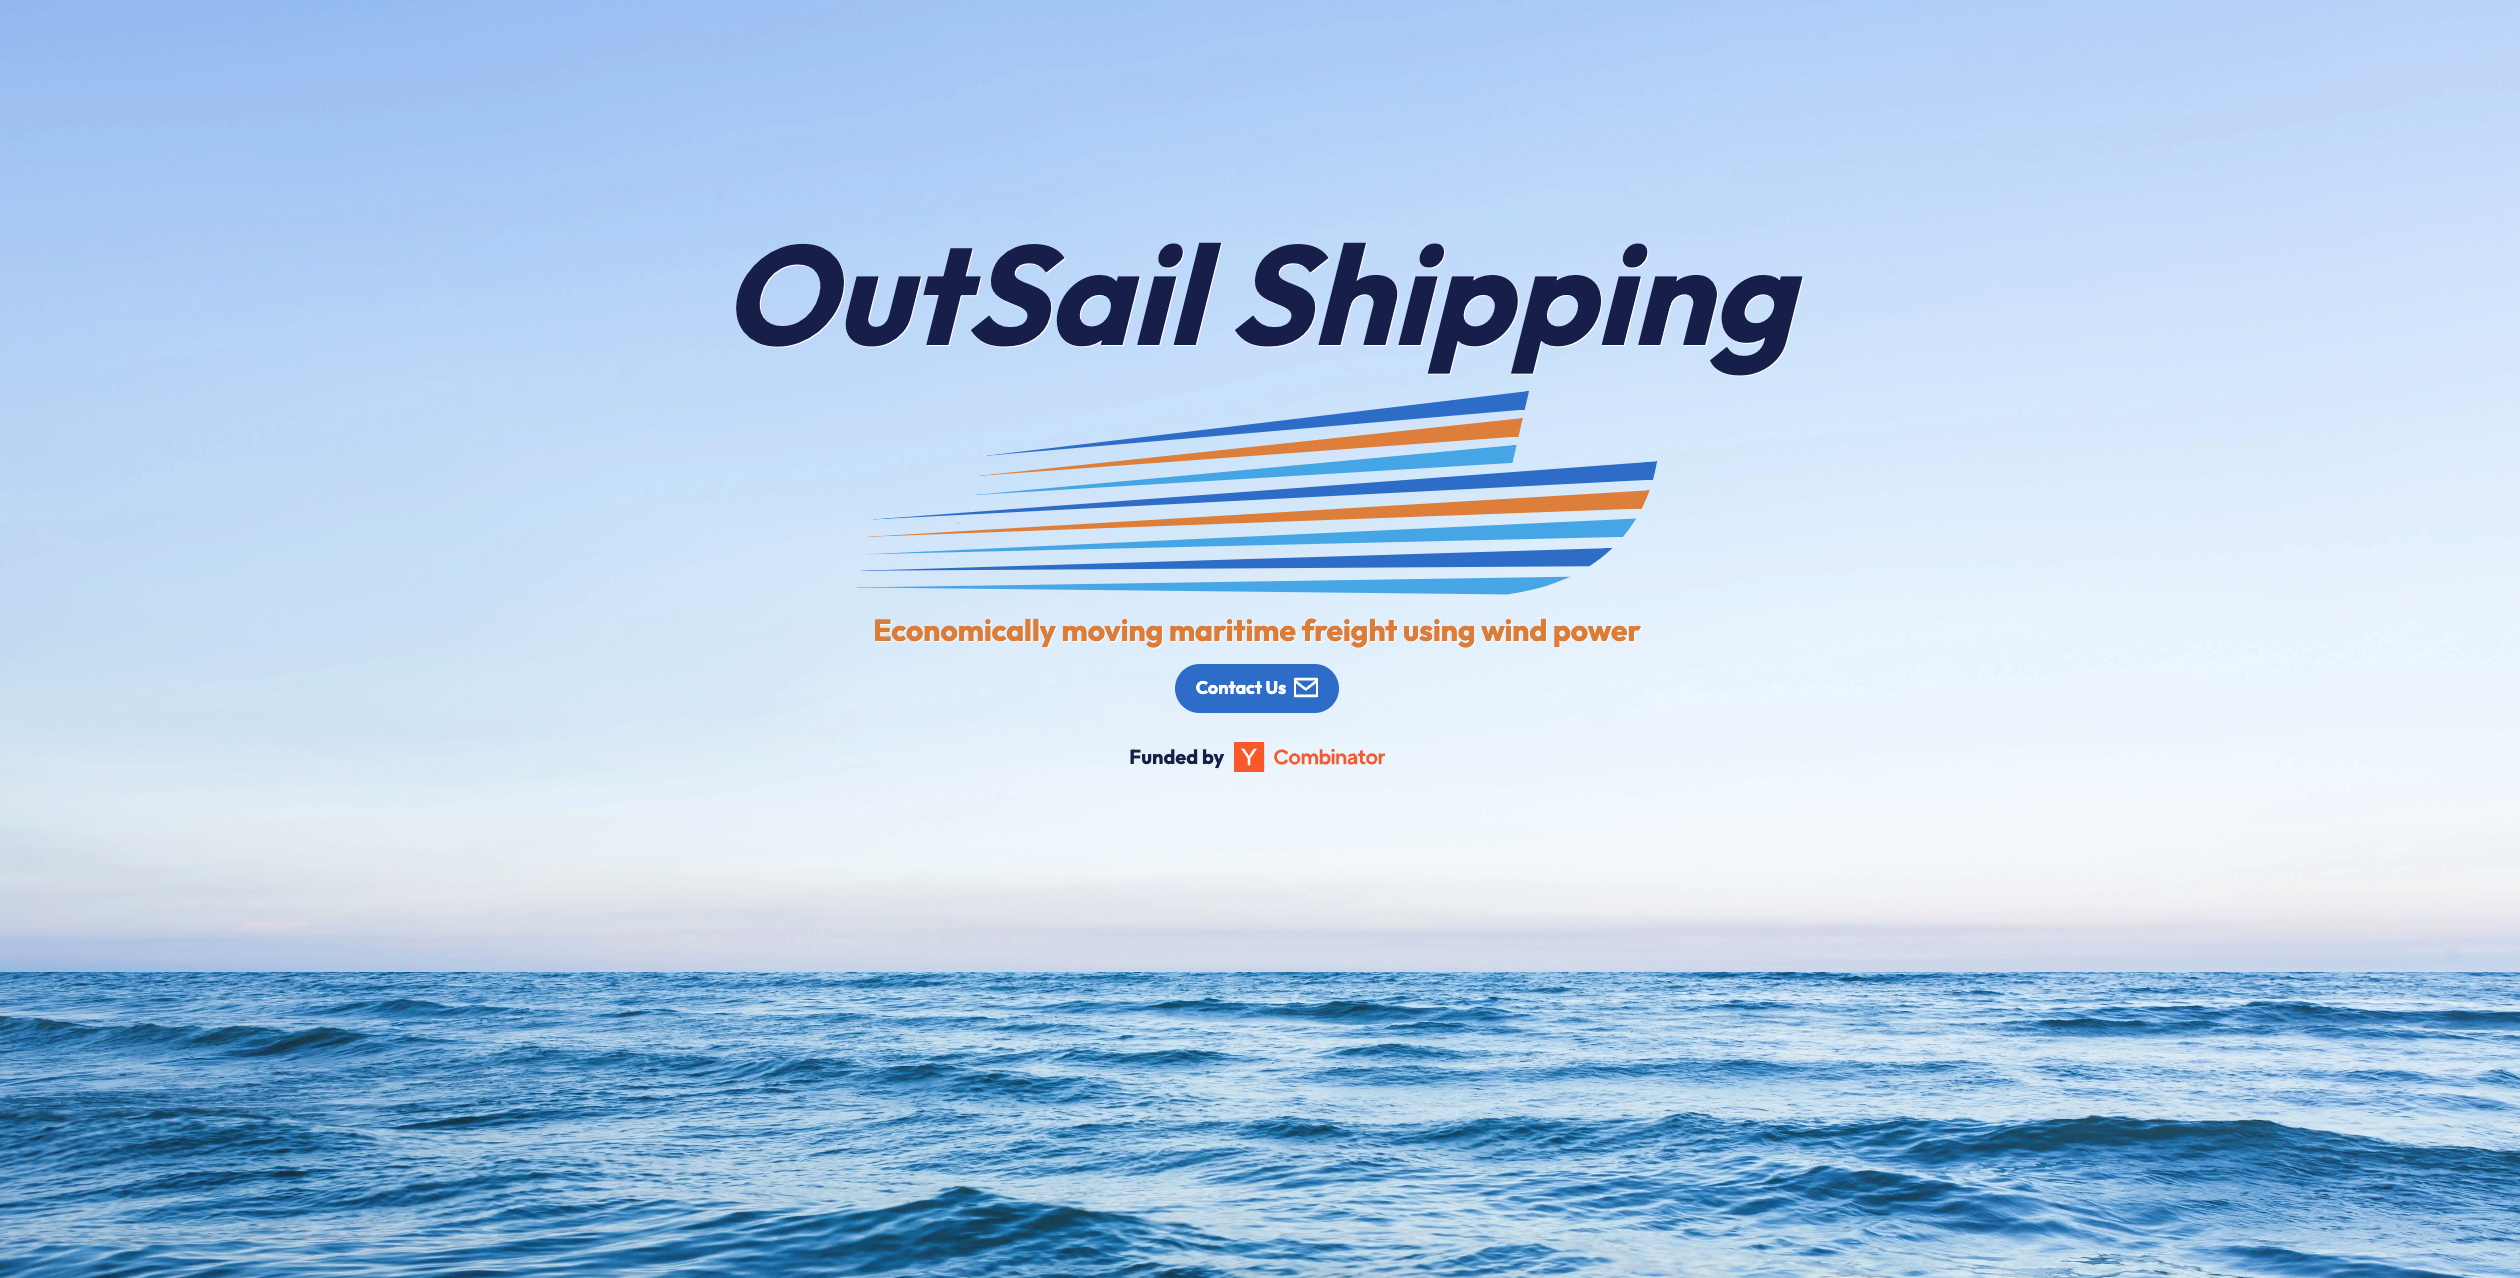 OutSail Shipping: Revolutionizing Maritime Freight with Containerized Sails